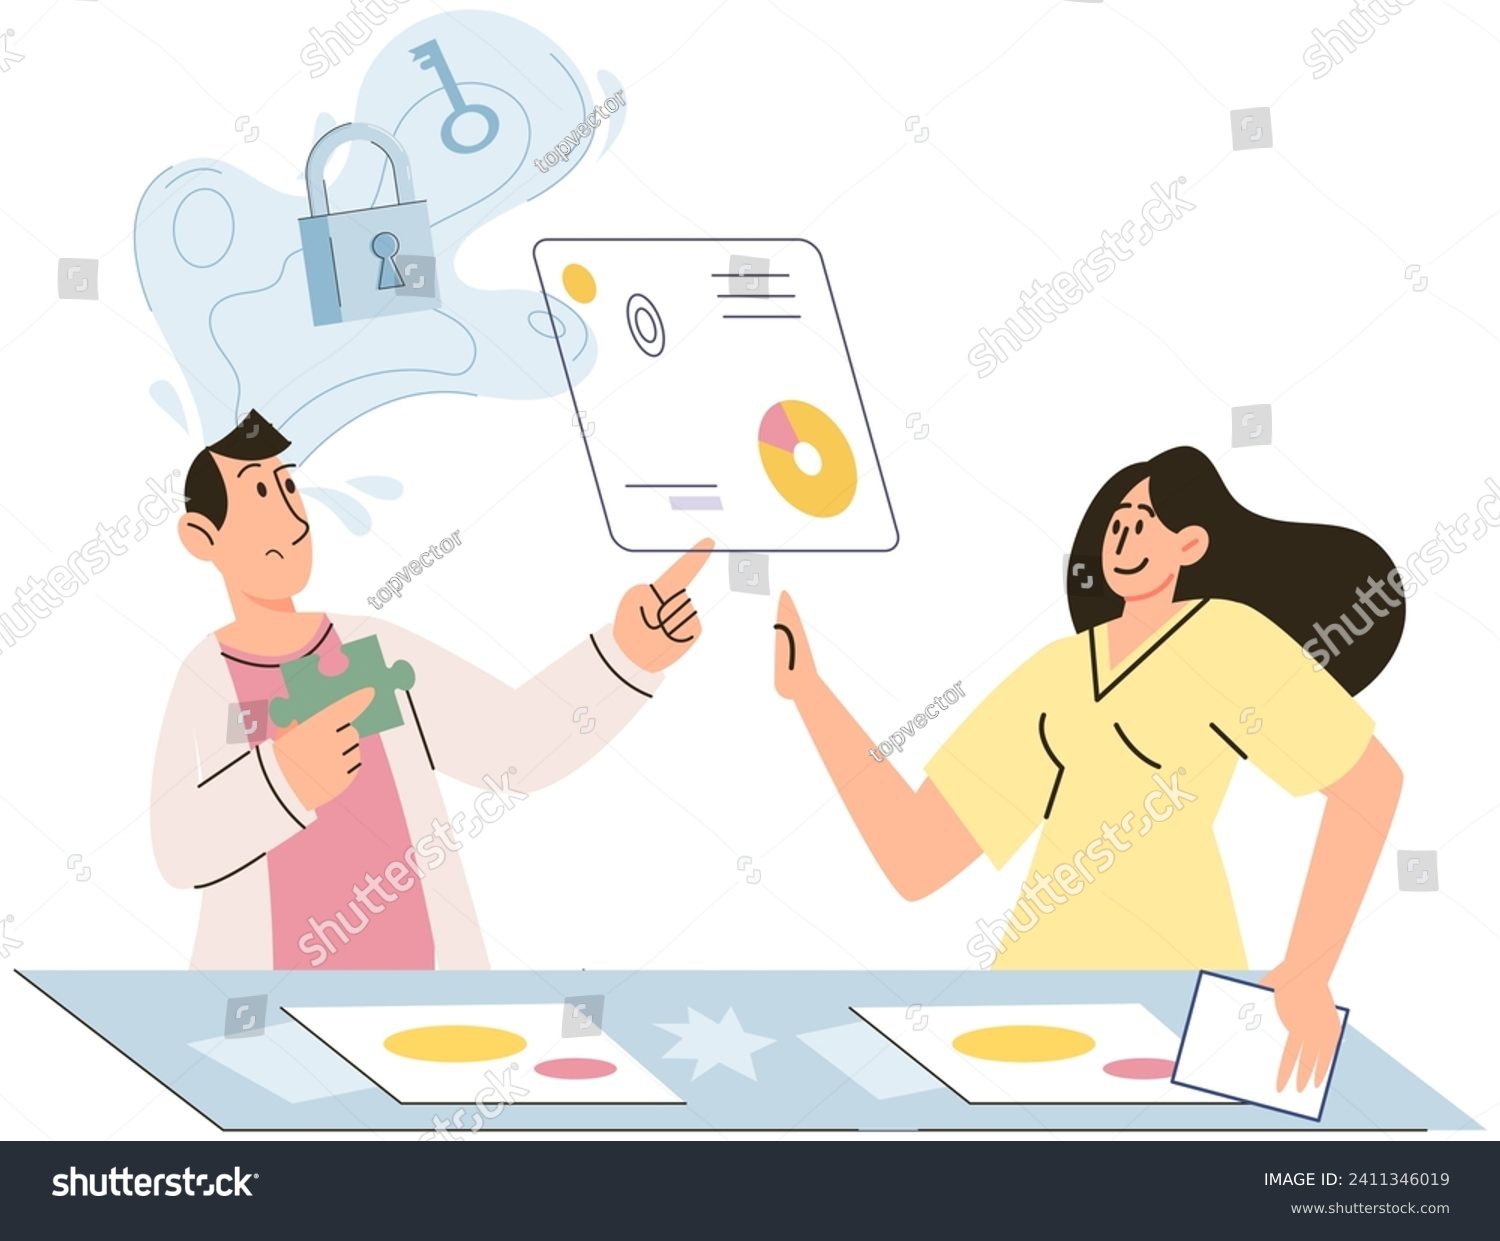 SVG of Psychoanalysis vector illustration. Individuality and personal experiences are central to concept psychoanalysis Identity and character development are important aspects mental health and personal svg